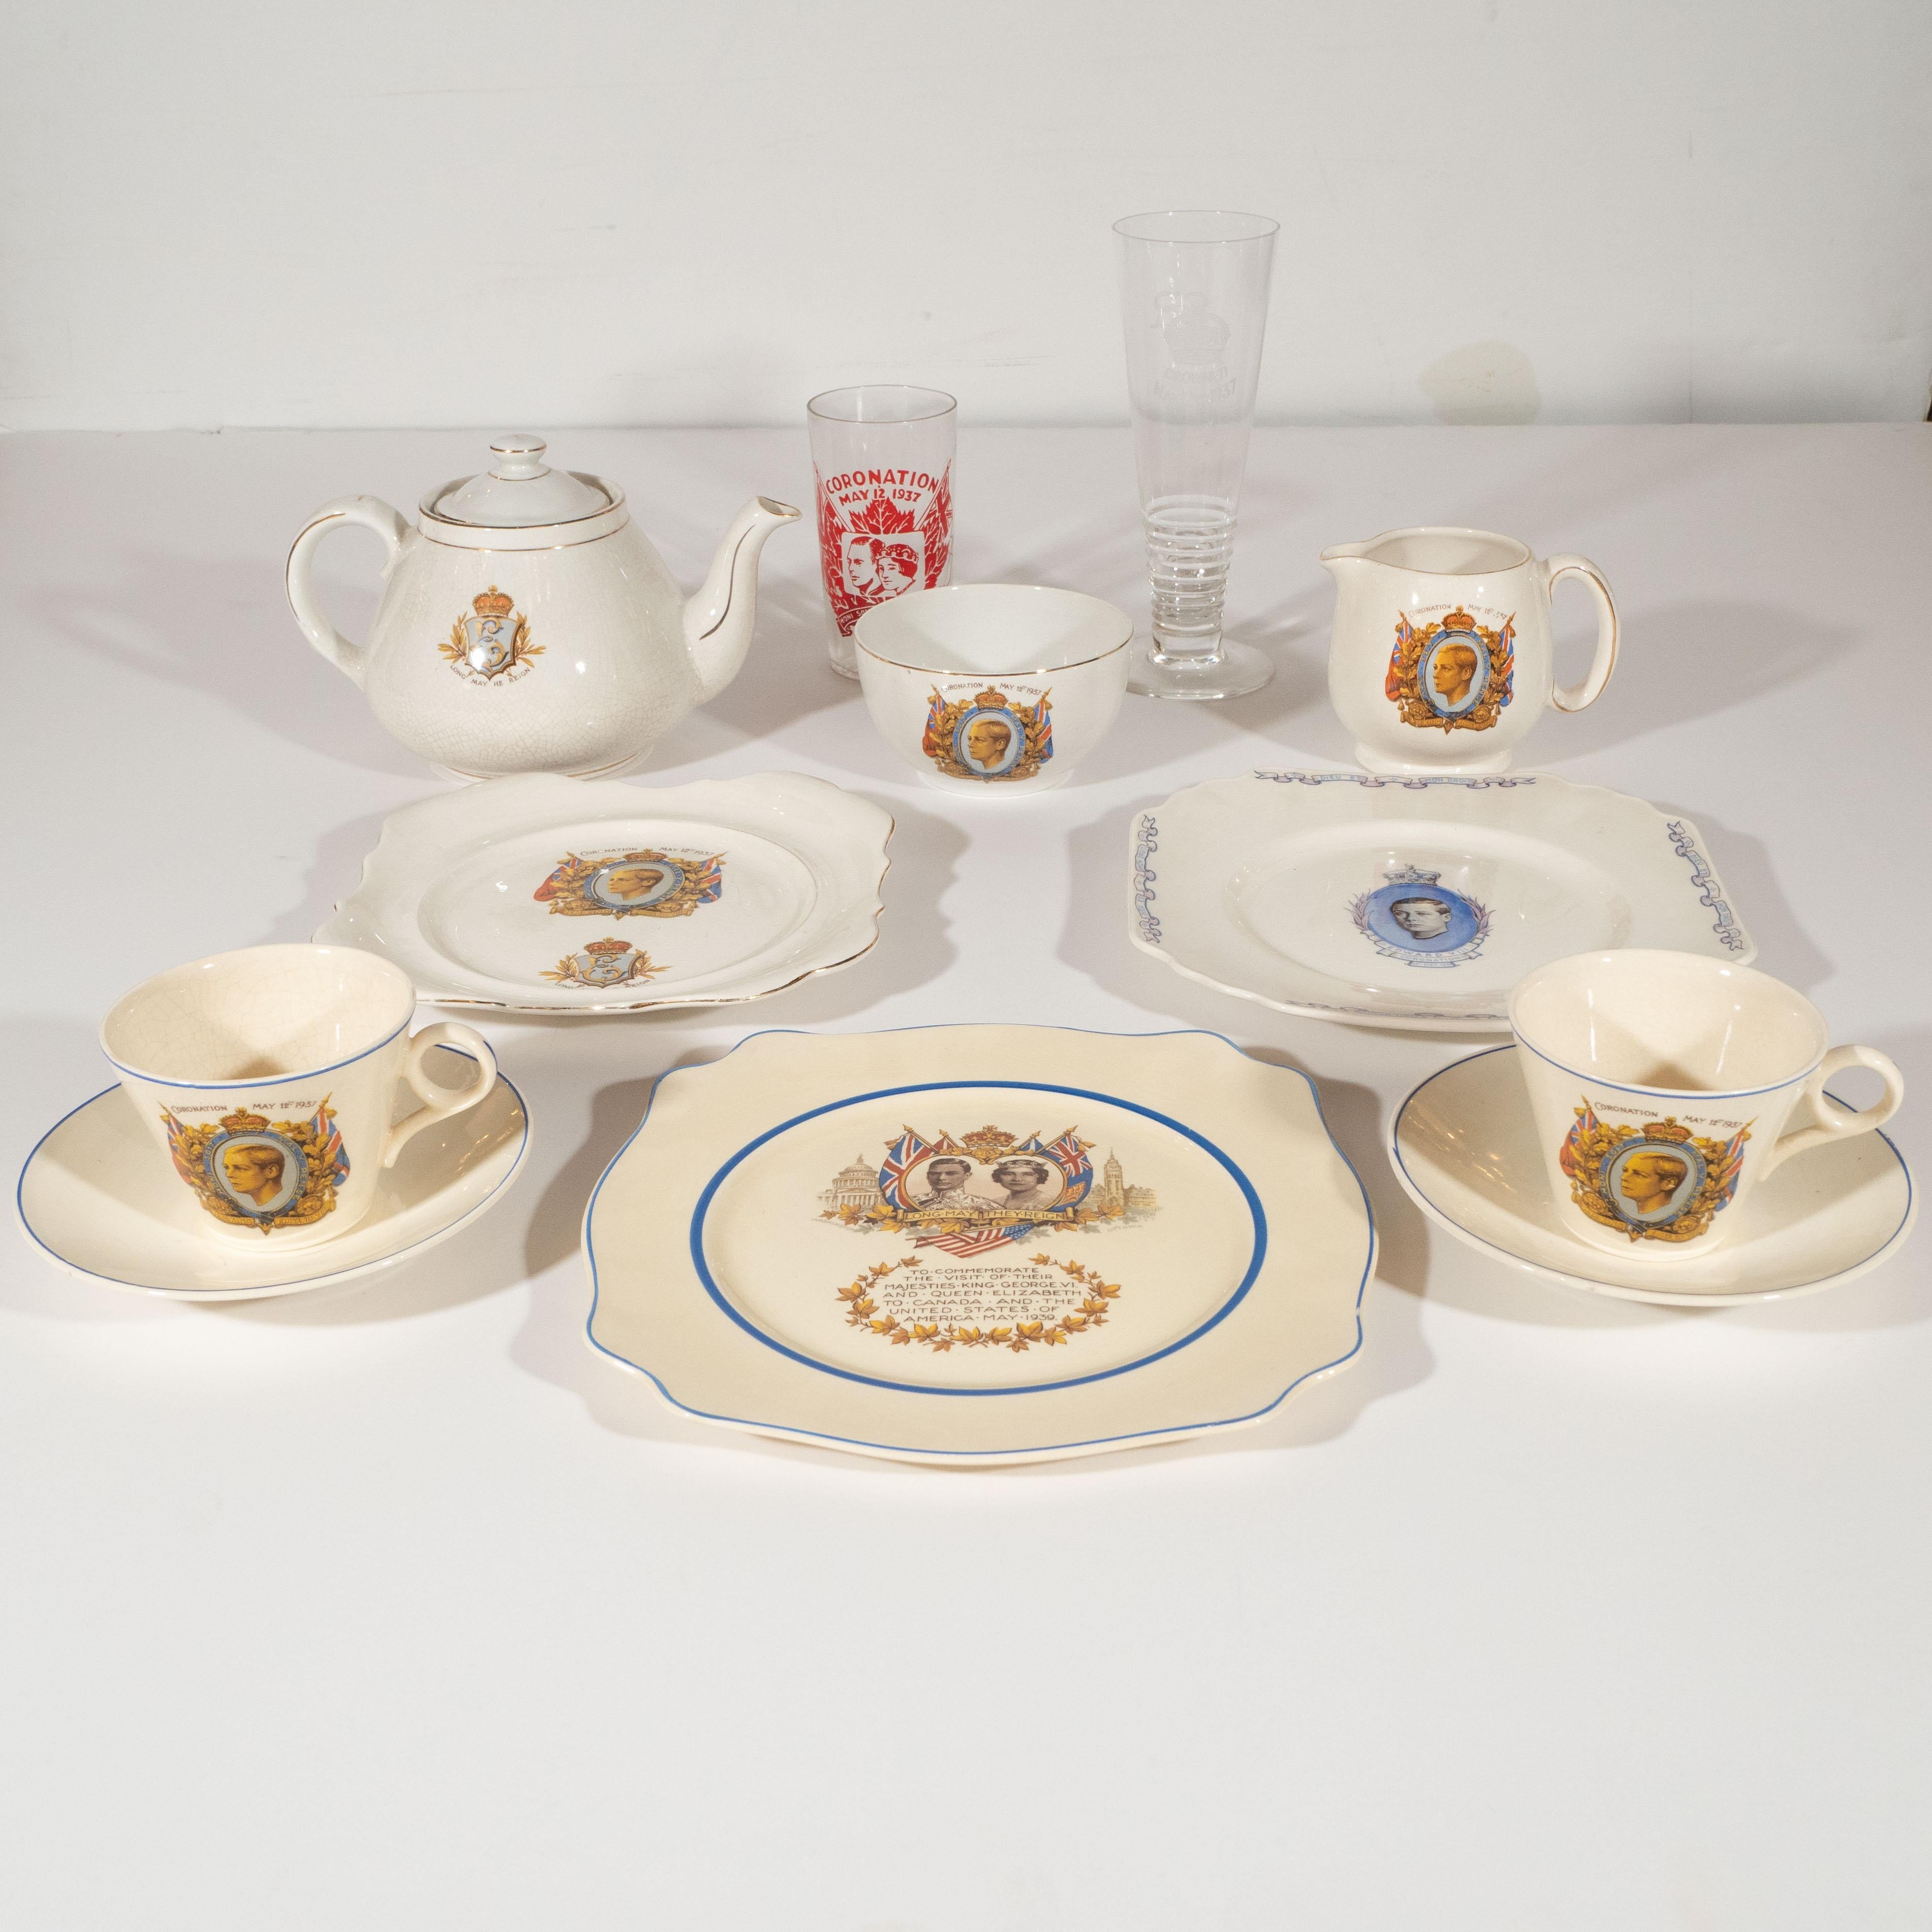 This collection of English commemorative ware consists of a 1937 Edward VIII coronation tea set, two 1837 Edward VIII coronation plates, a 1937 Edward VIII coronation flute, and a 1939 plate commemorating George VI and Queen Elizabeth's trip to the